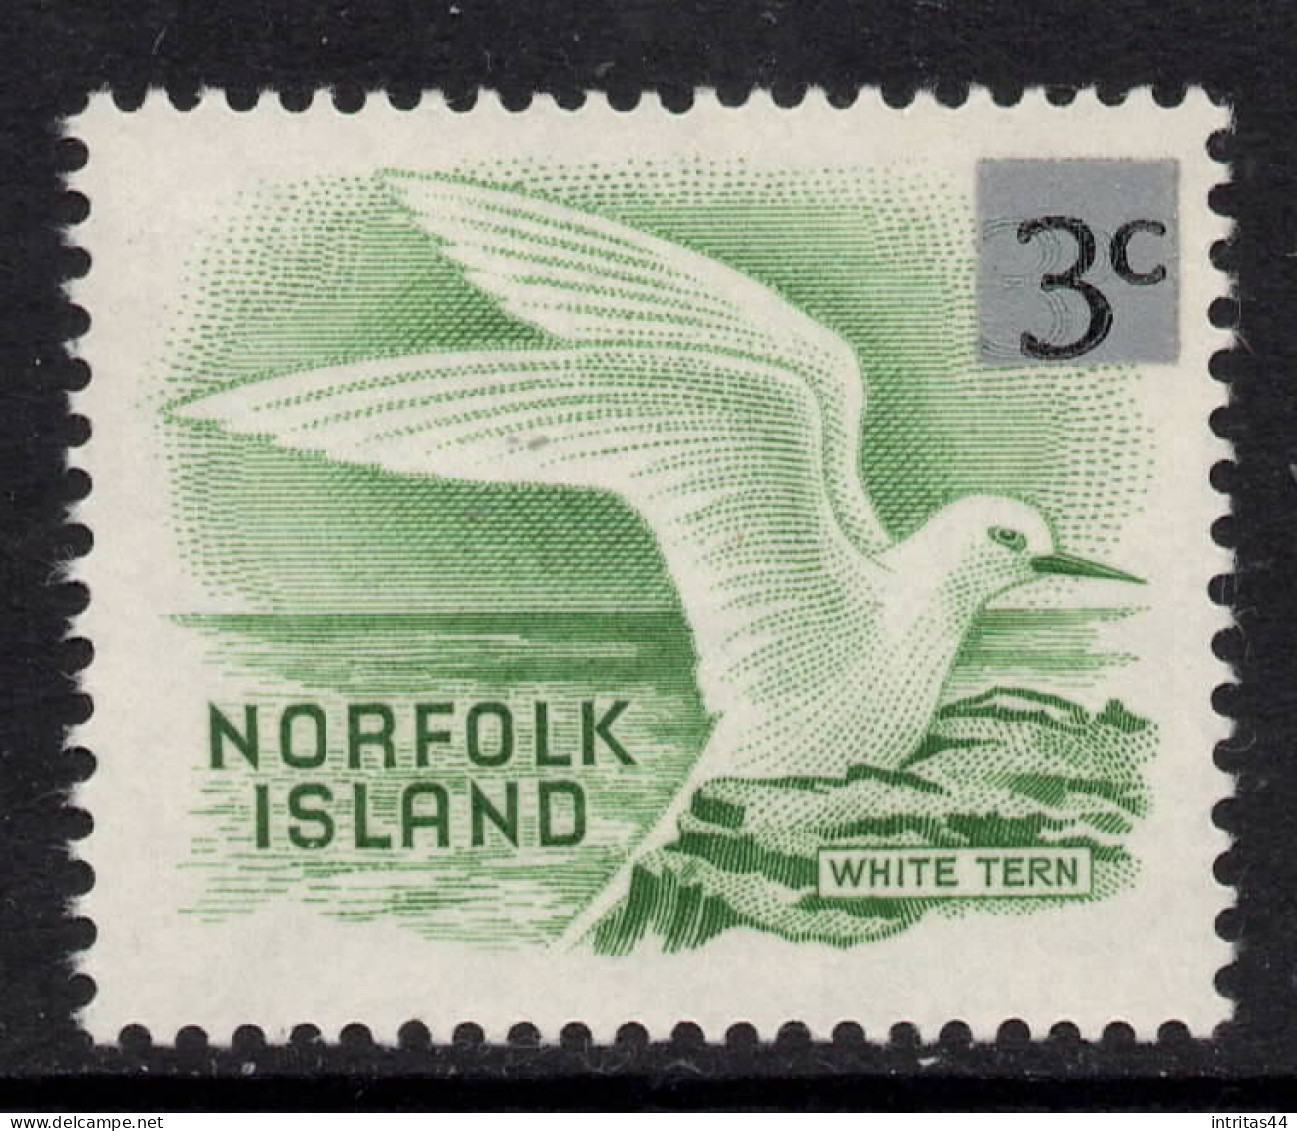 NORFOLK ISLAND 1966 SURCH DECIMAL CURRENCY "3c ON 3d  GREEN " WHITE TERN " STAMP MNH - Norfolkinsel